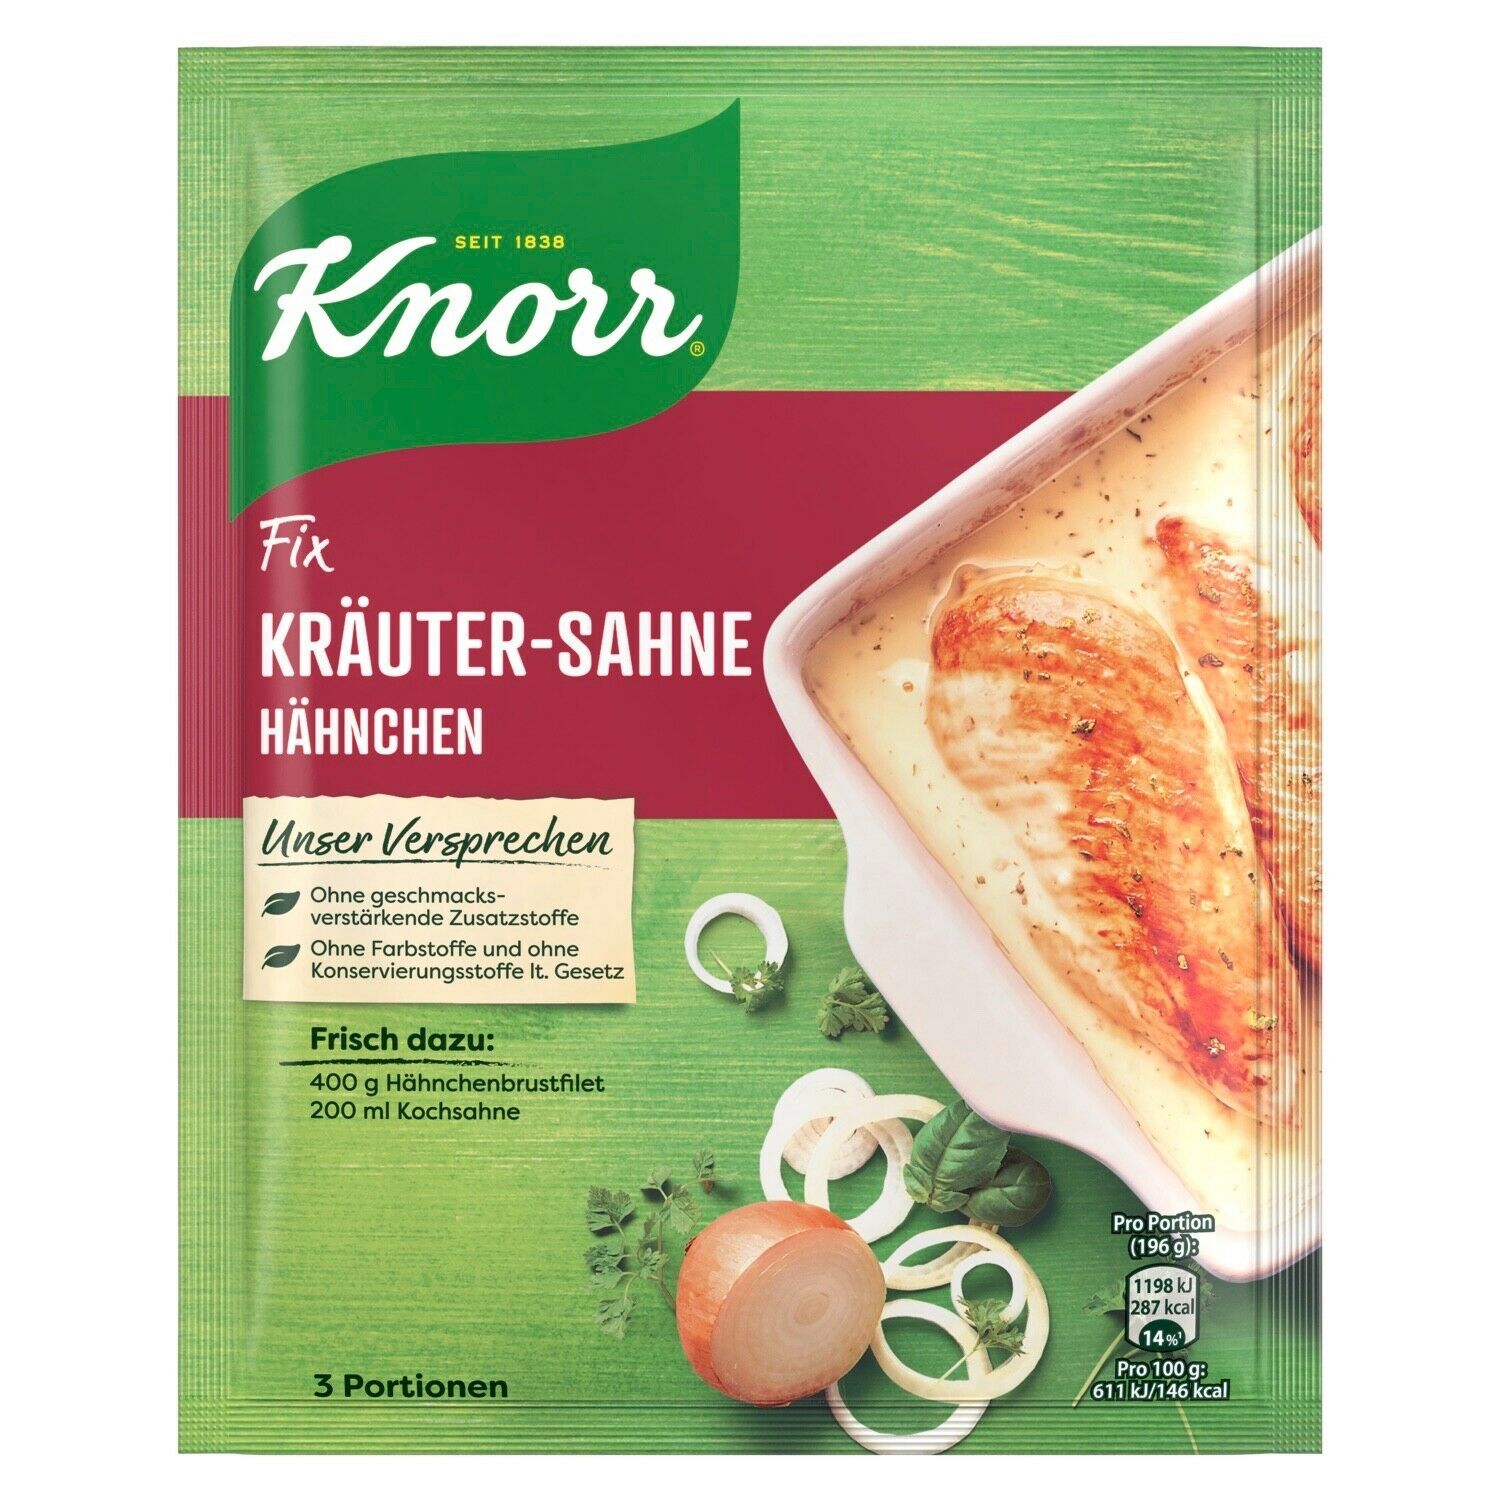 KNORR Krauter Sahne Hanchen Creamy chicken with herbs 1pc/3 portions -FREE SHIP - $5.89